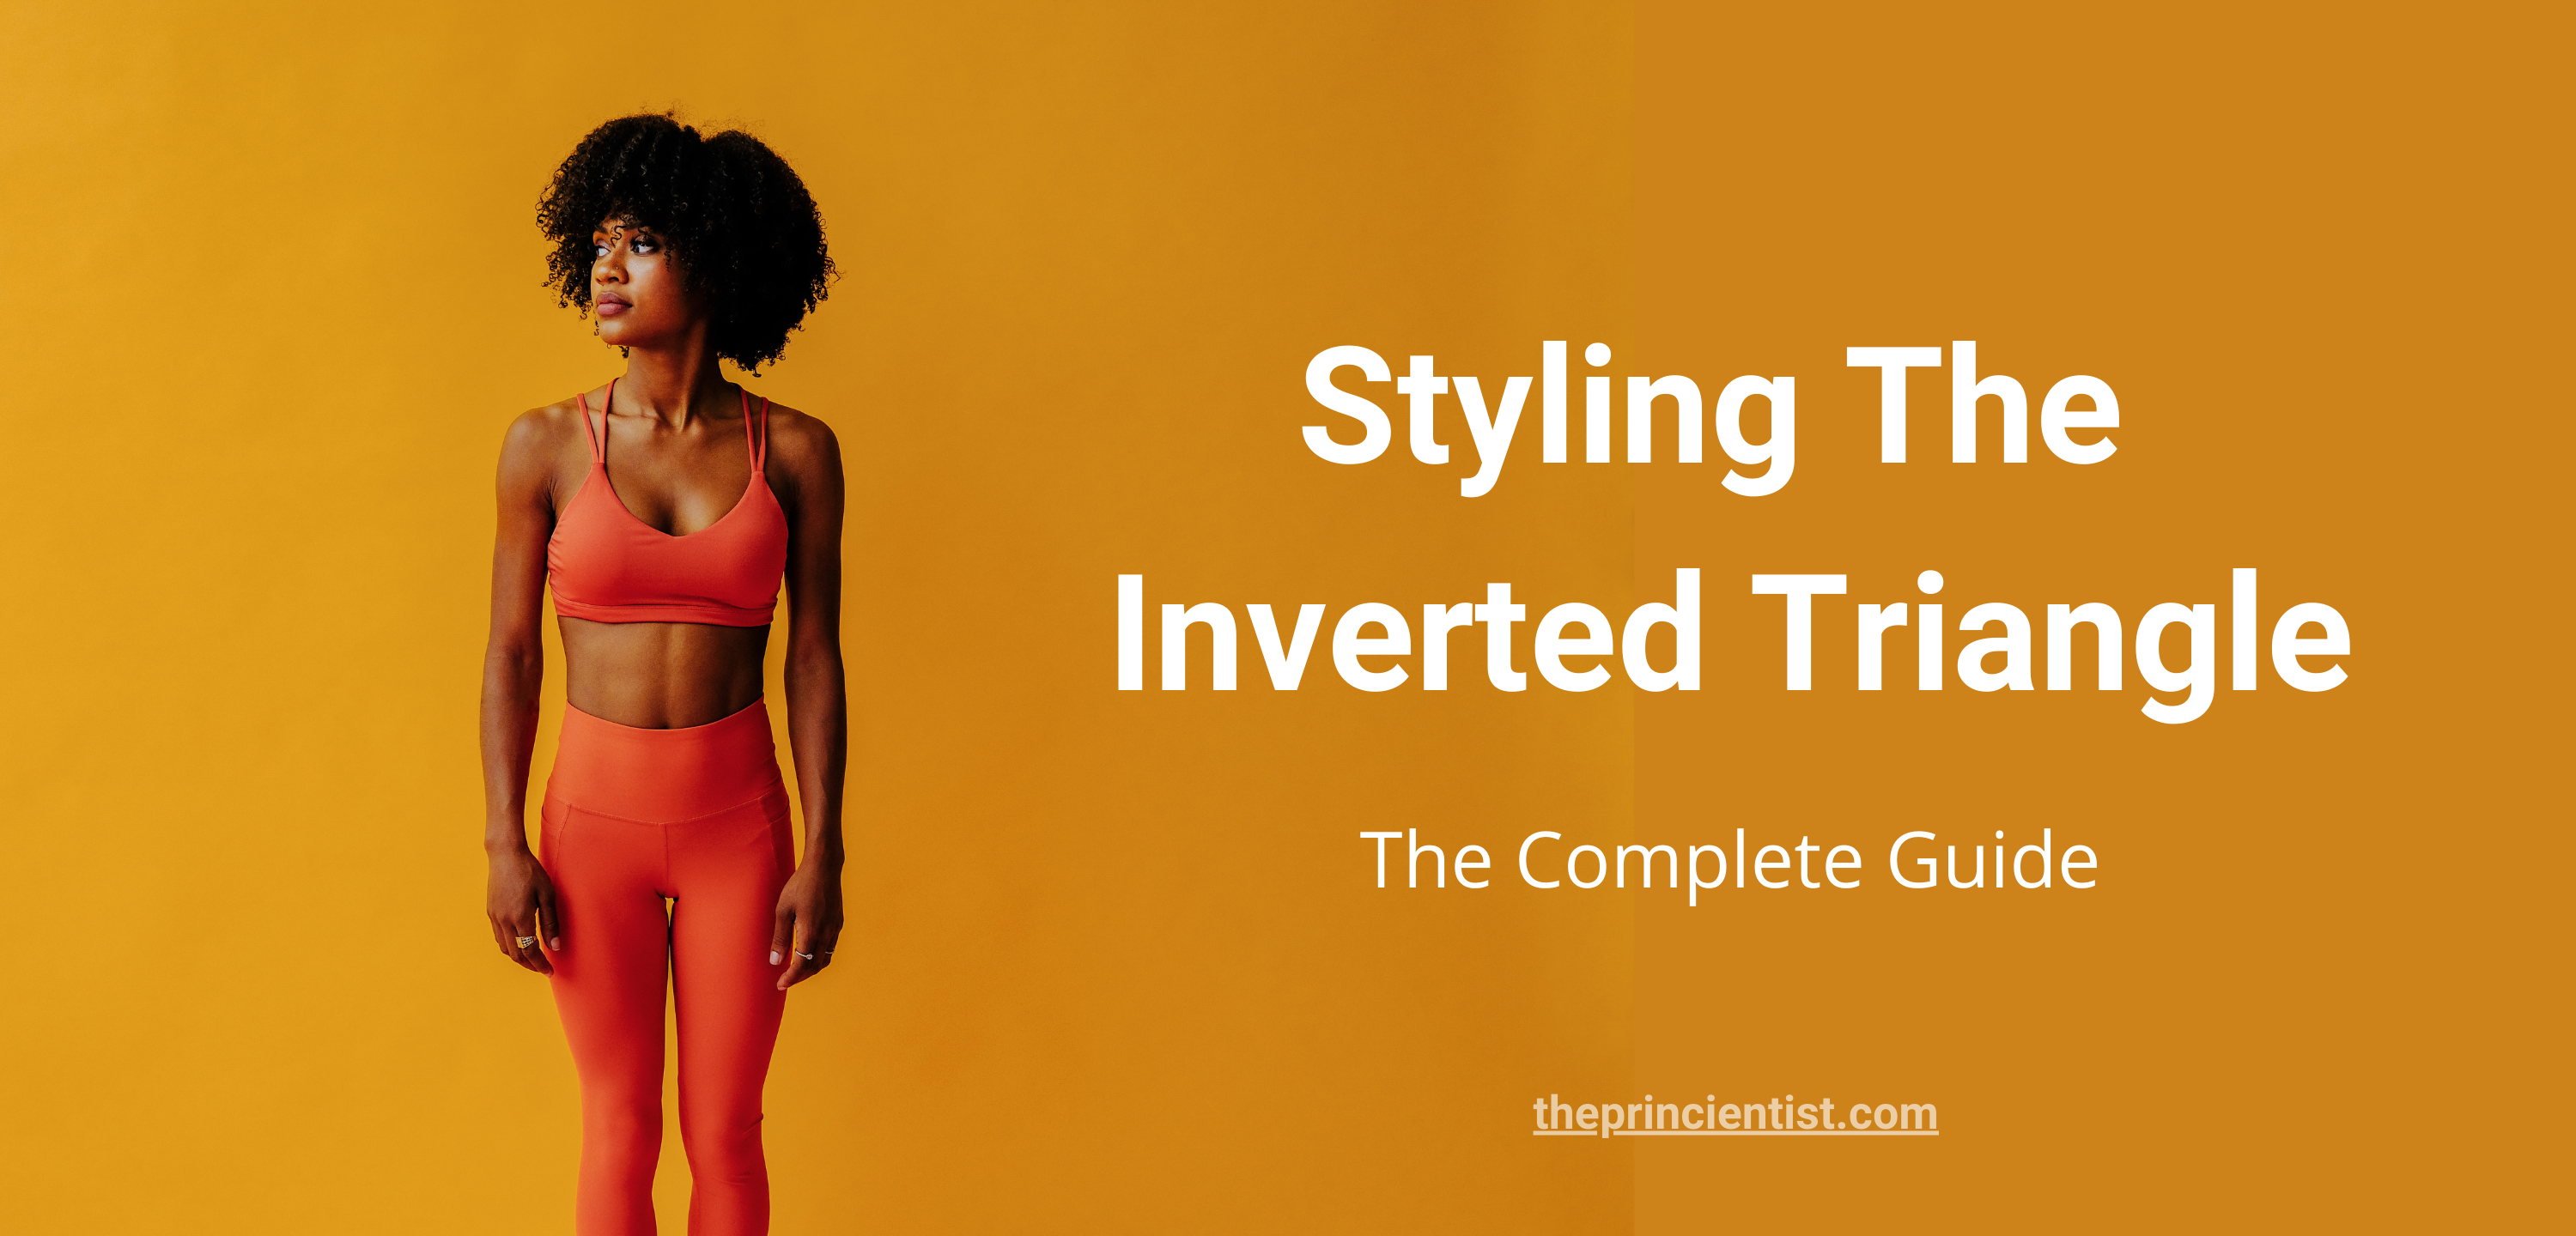 Flattering Inverted Triangle Shorts for a Stylish Look